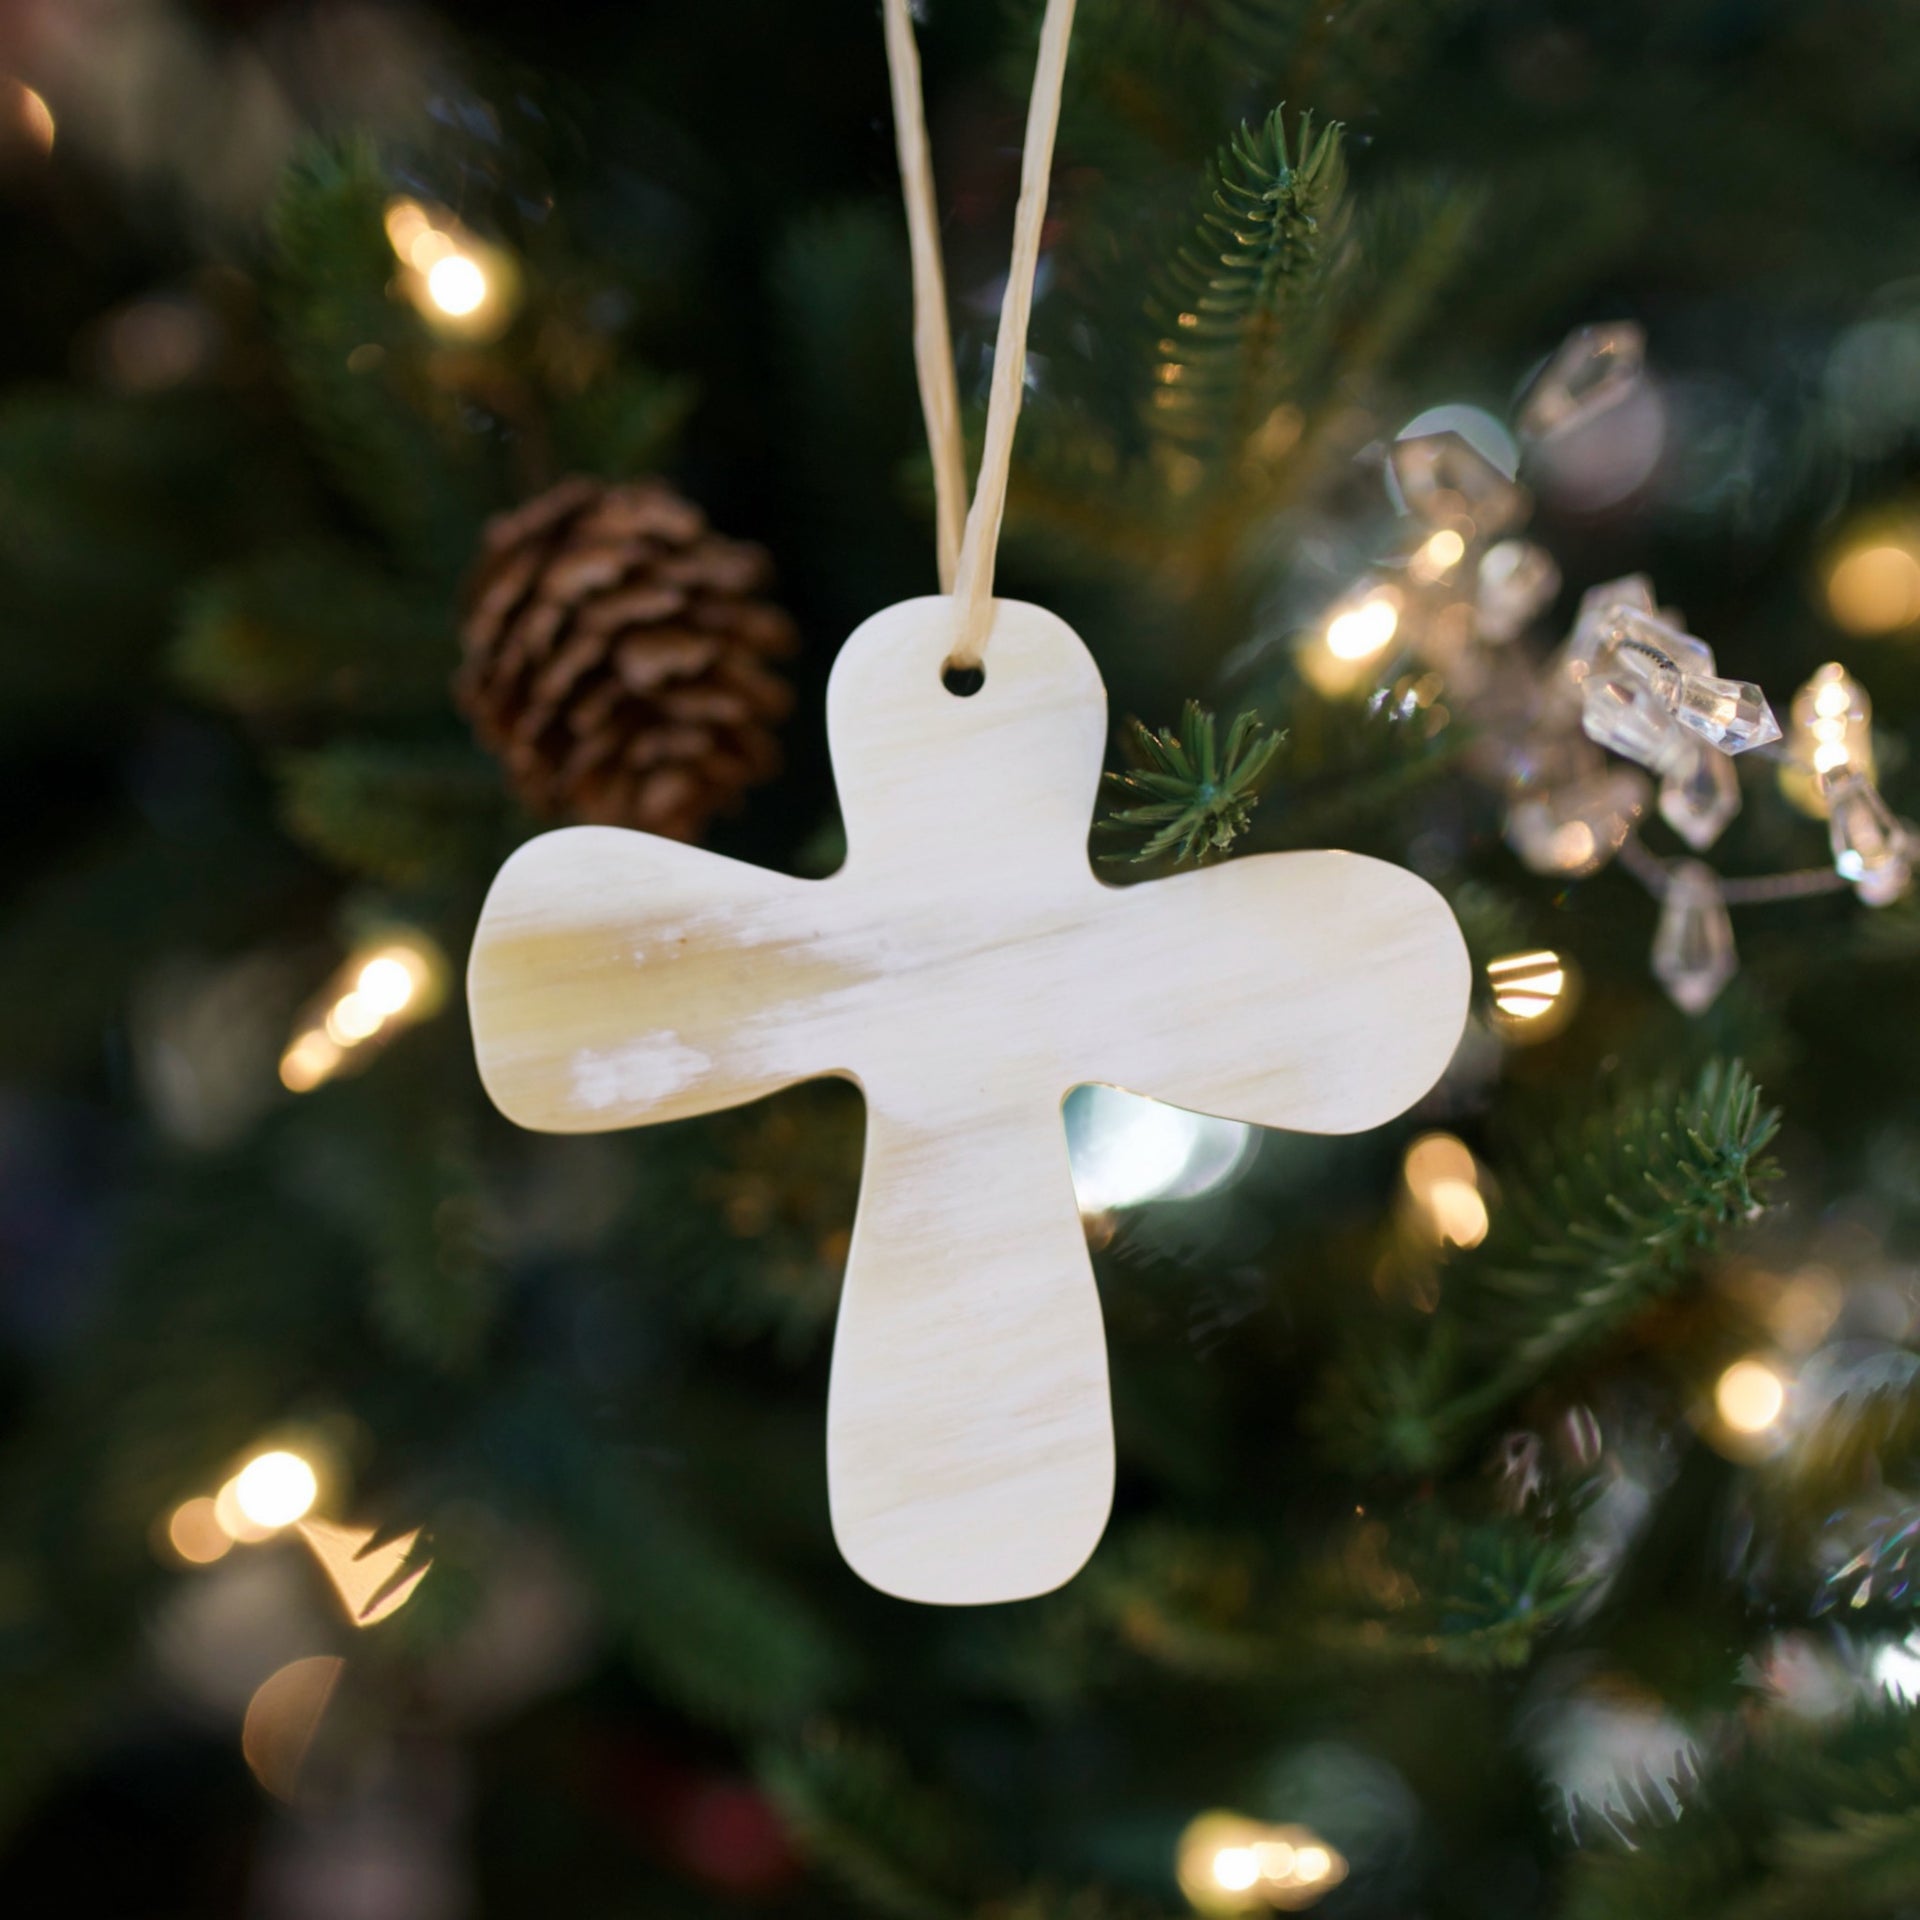 Cow Horn Cross Ornament hanging on an evergreen Christmas tree